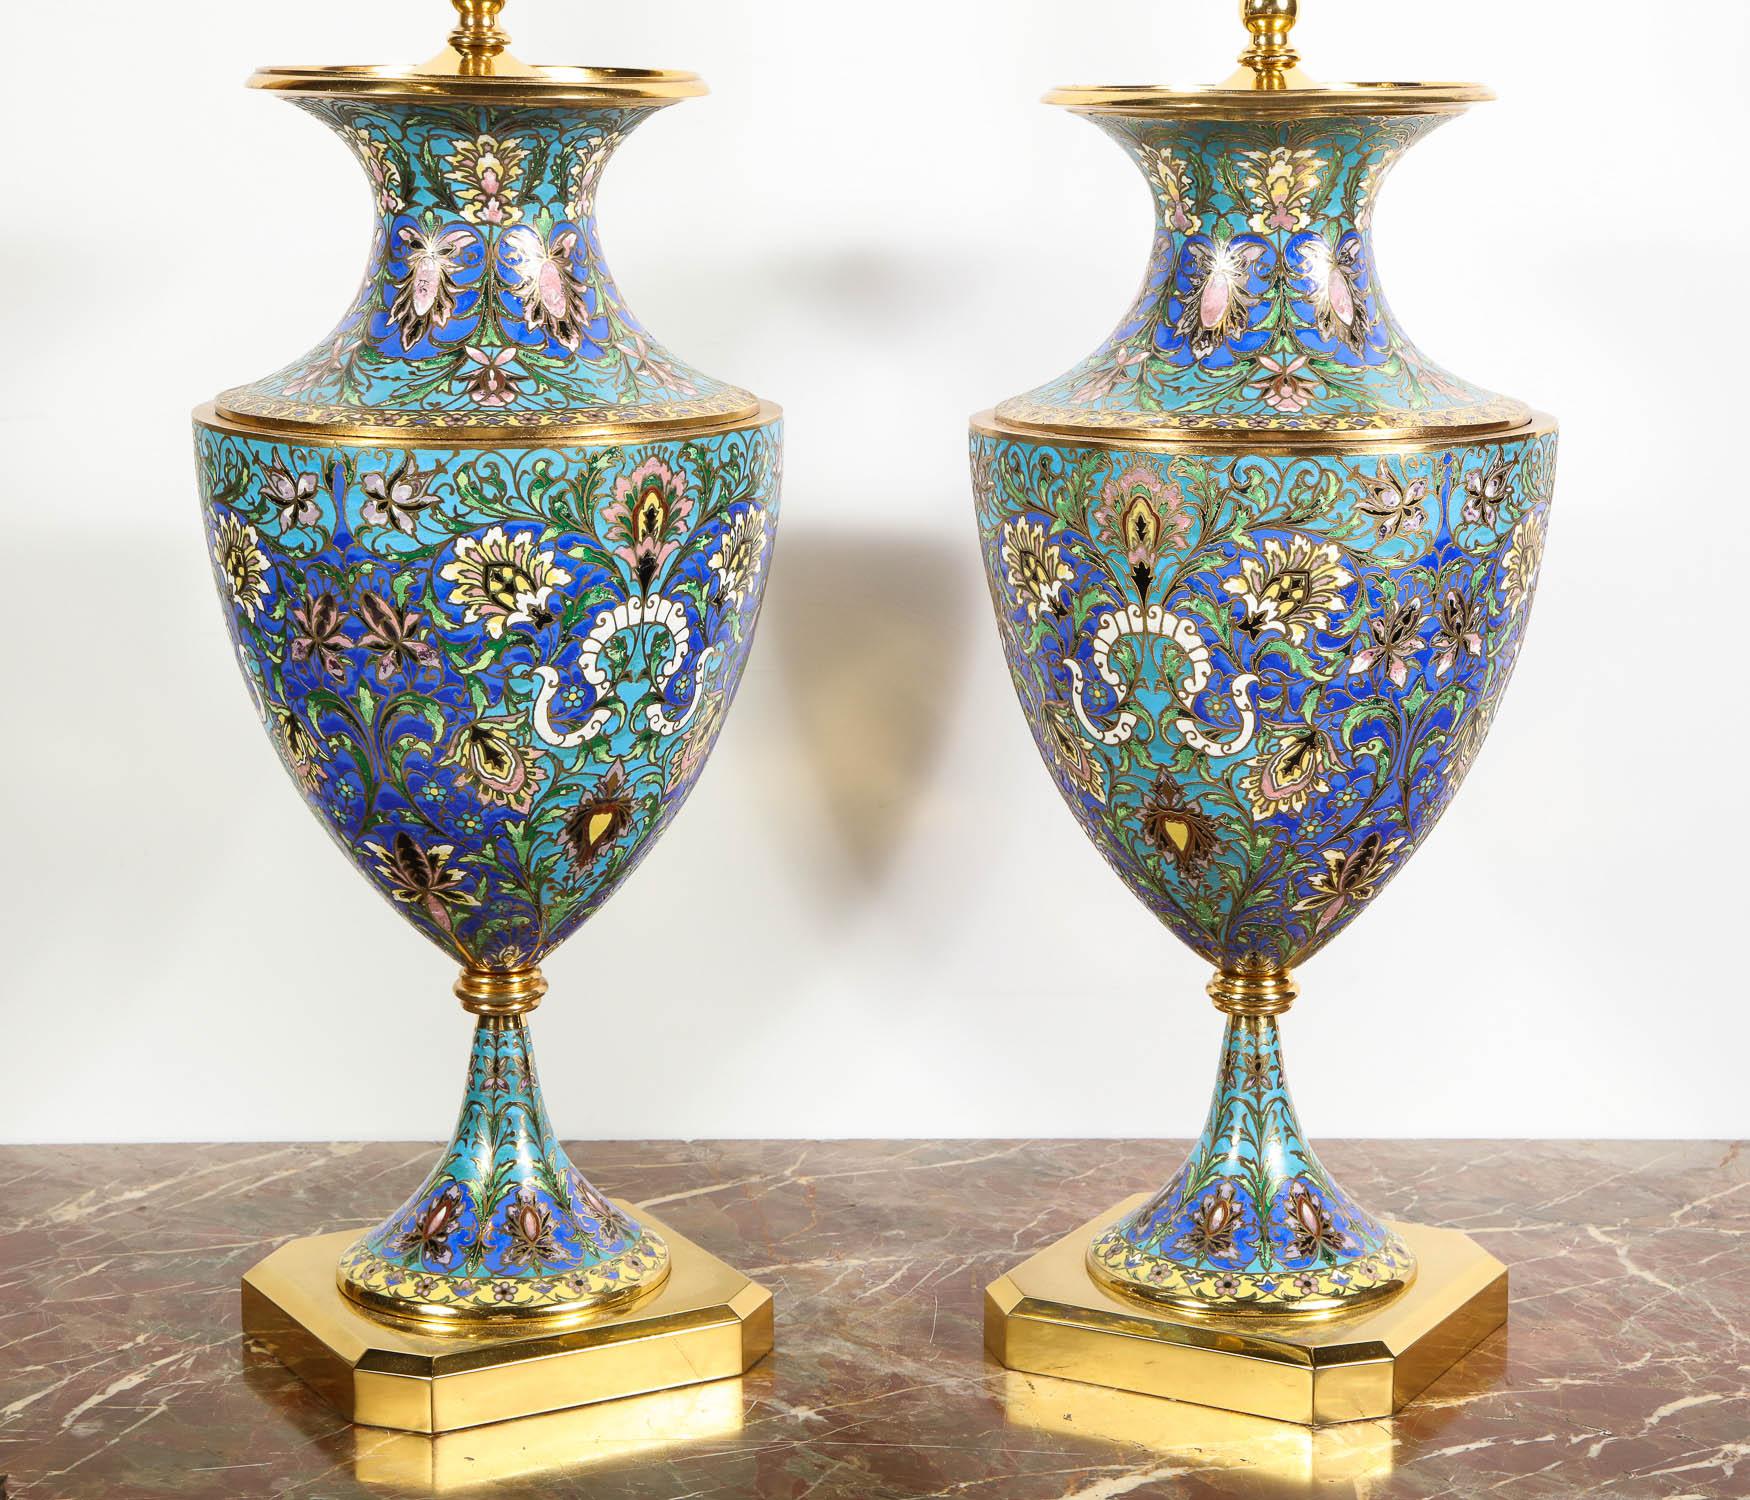 20th Century Large Pair of French Gilt Bronze-Mounted Champlevé Cloisonné Enamel Table Lamps